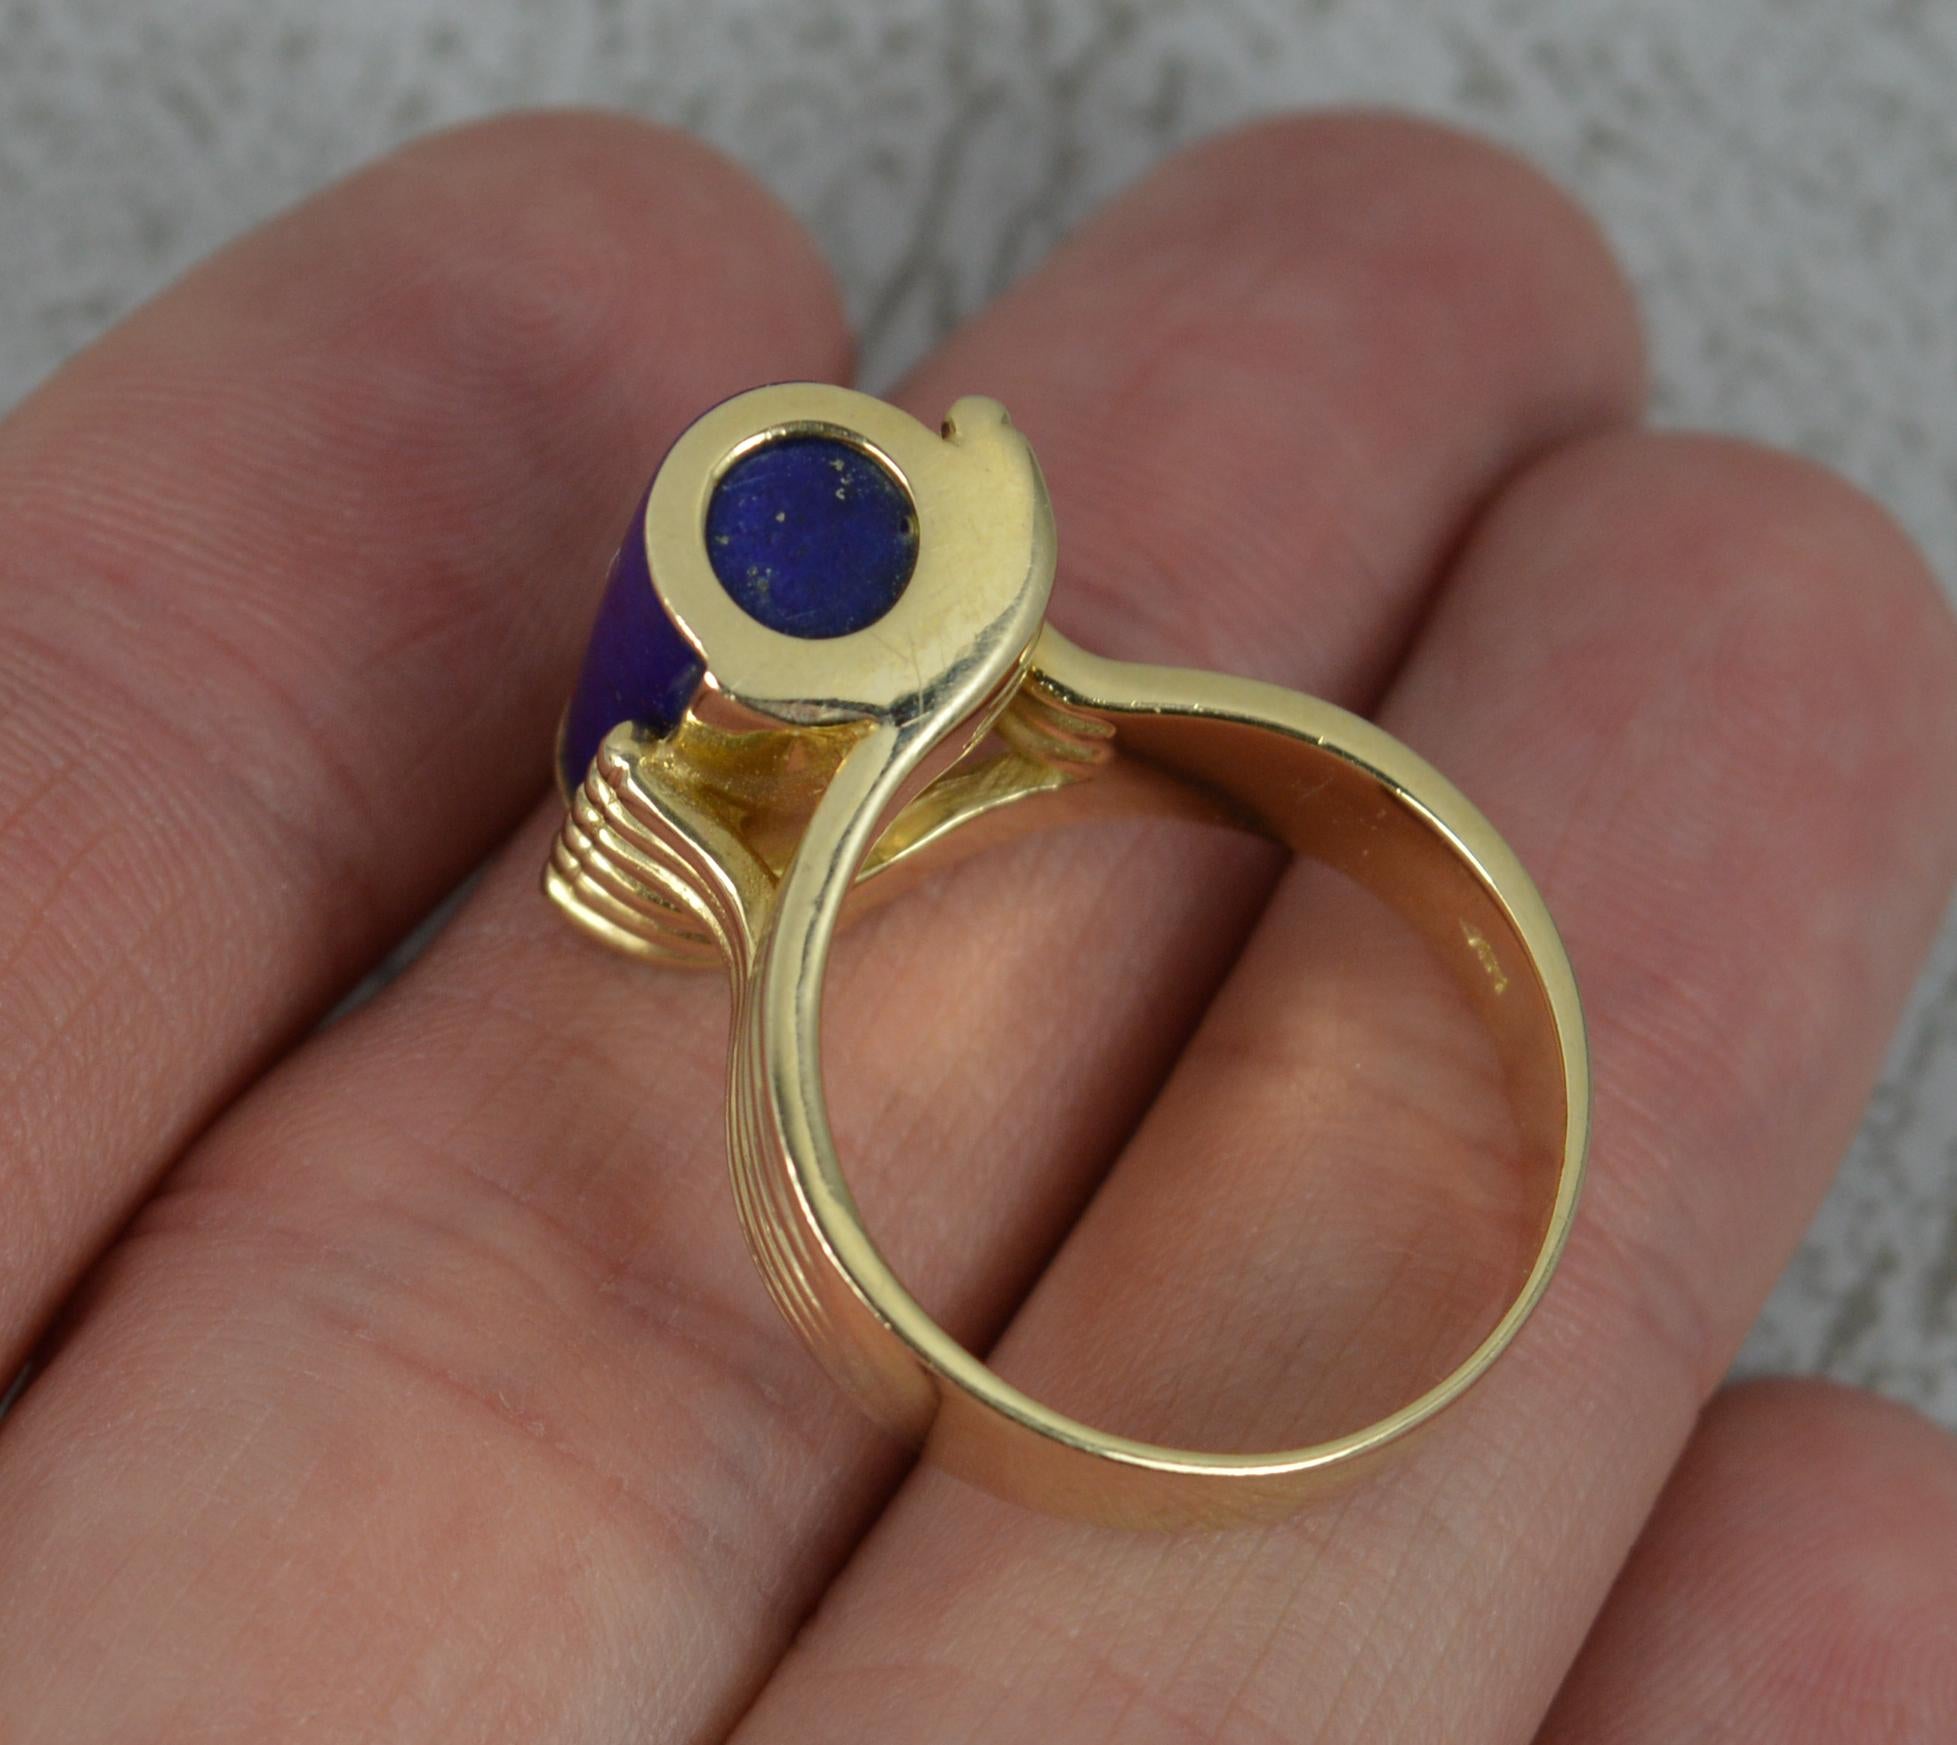 Cabochon Stunning Lapis Lazuli and 14 Carat Gold Solitaire Statement Ring